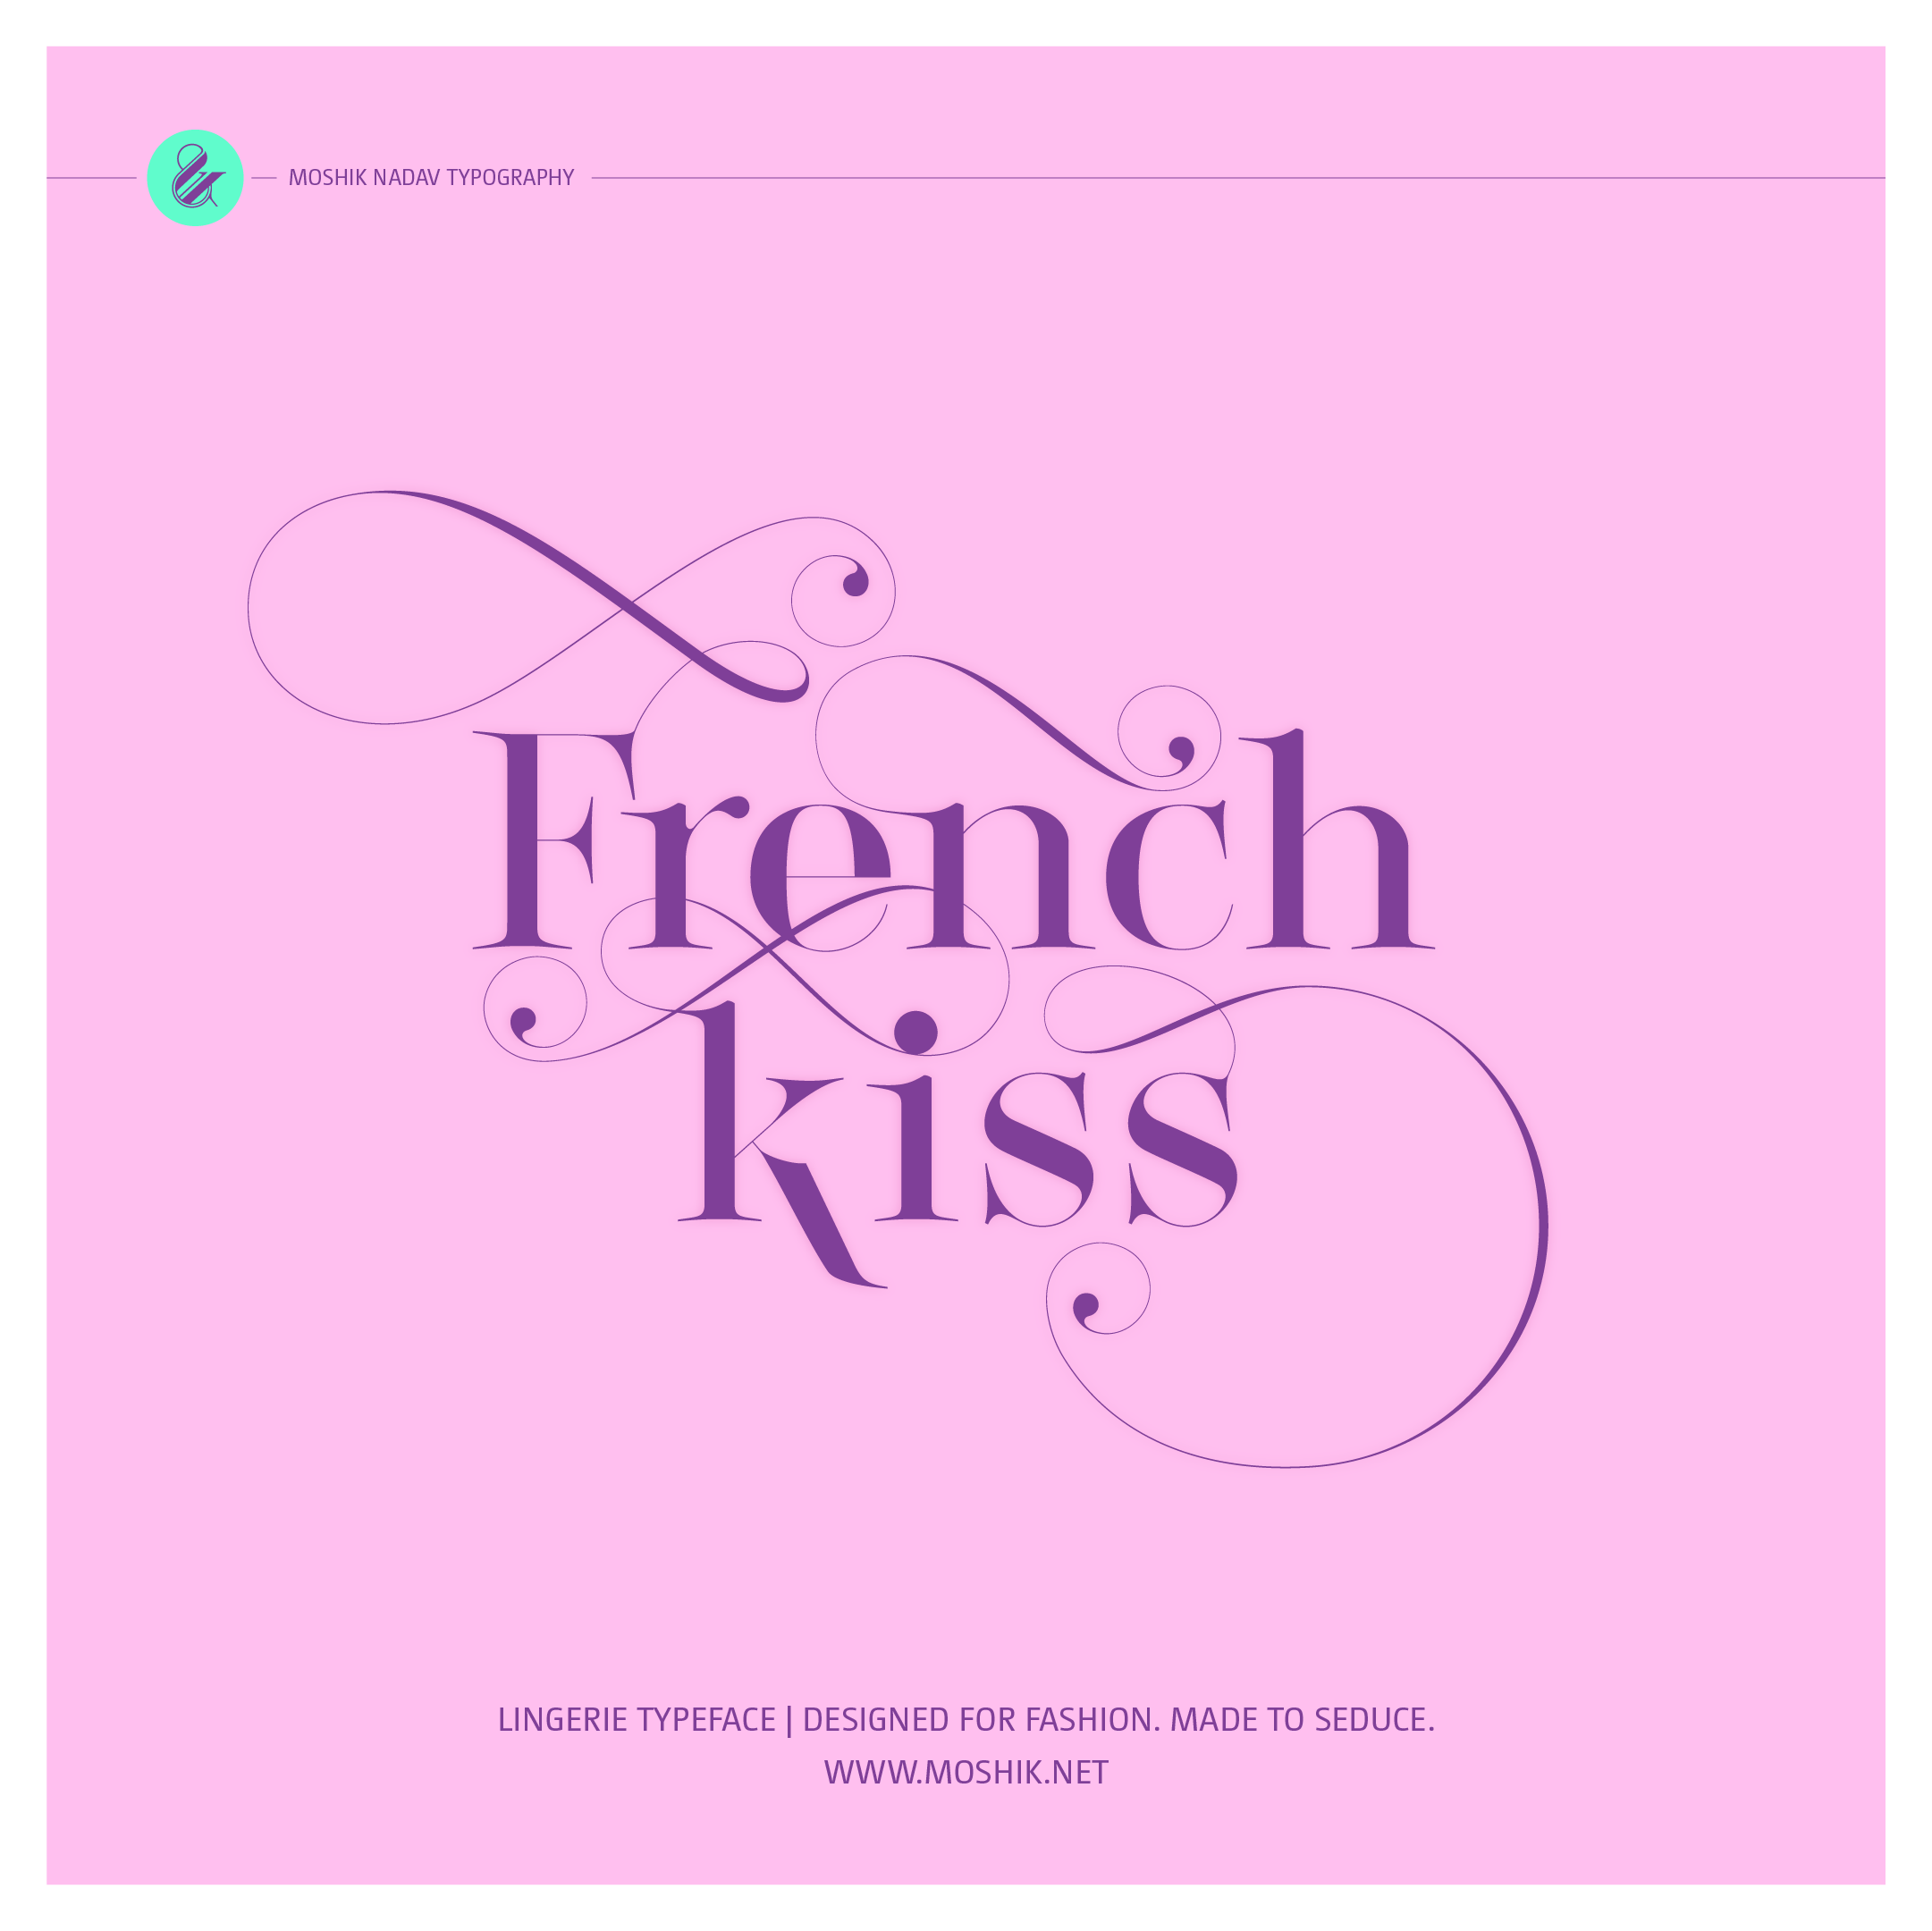 French kiss, Lingerie Typeface, fashion fonts, fashion typography, vogue fonts, must have fonts for fashion, best fonts 2022, must have fonts 2022, Fashion logos, vogue fonts, fashion magazine fonts, sexy logos, sexy fashion logo, fashion ligatures